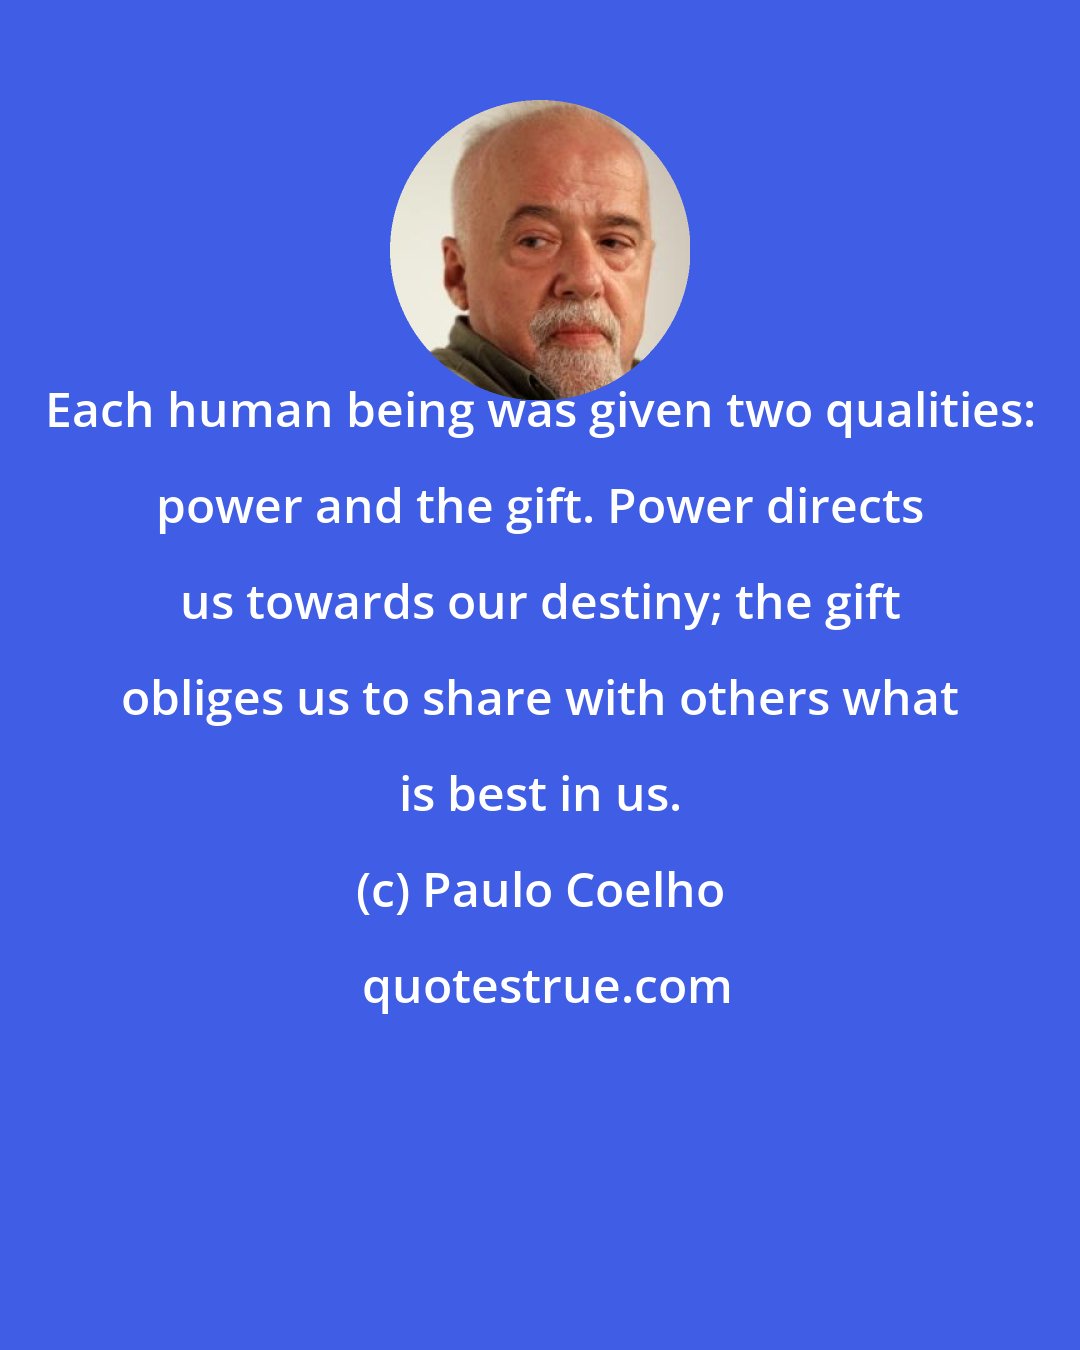 Paulo Coelho: Each human being was given two qualities: power and the gift. Power directs us towards our destiny; the gift obliges us to share with others what is best in us.